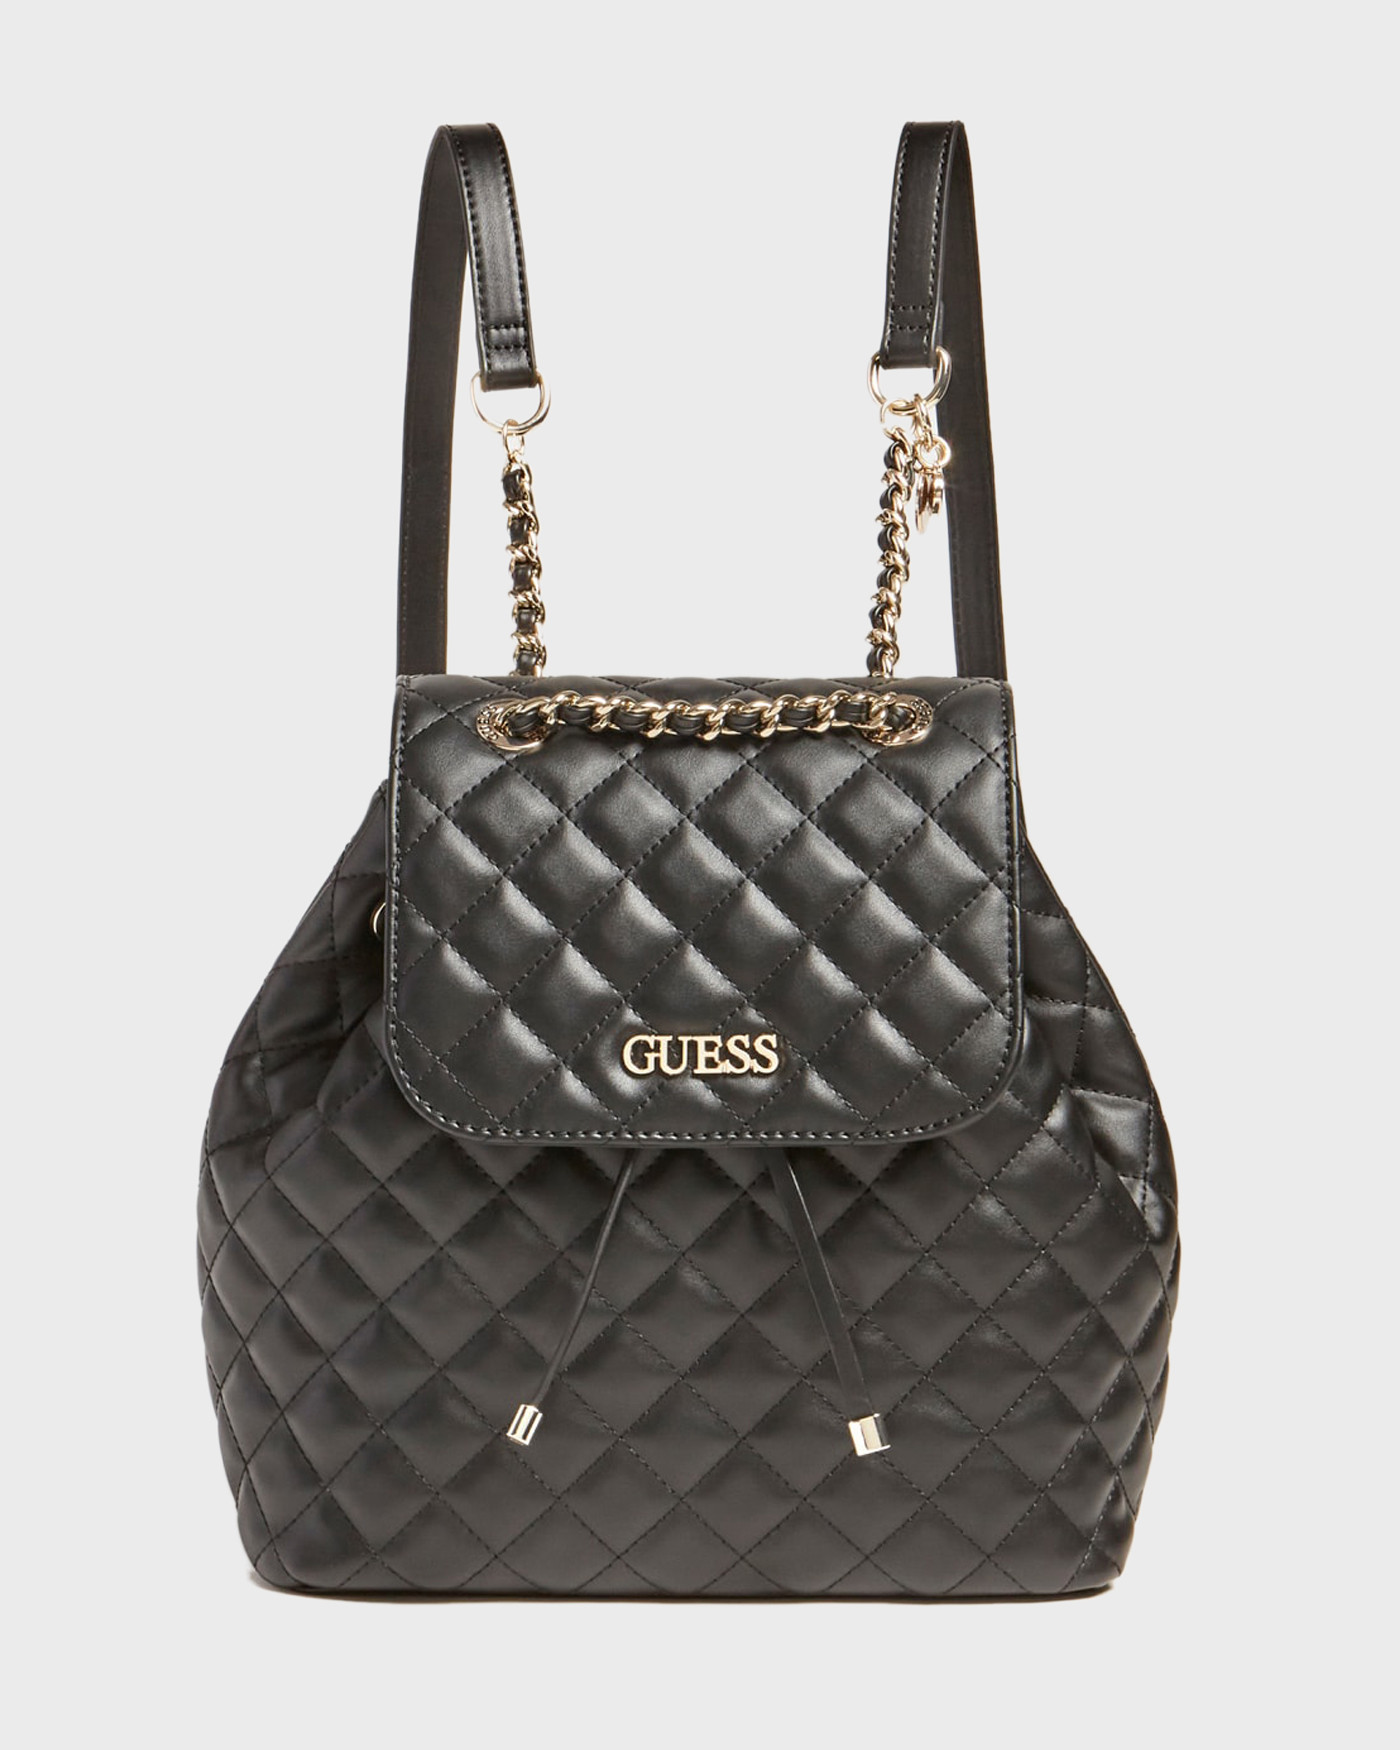 GUESS QUILTED BACKPACK - VG797032 ILLY - sagiakos-stores.gr